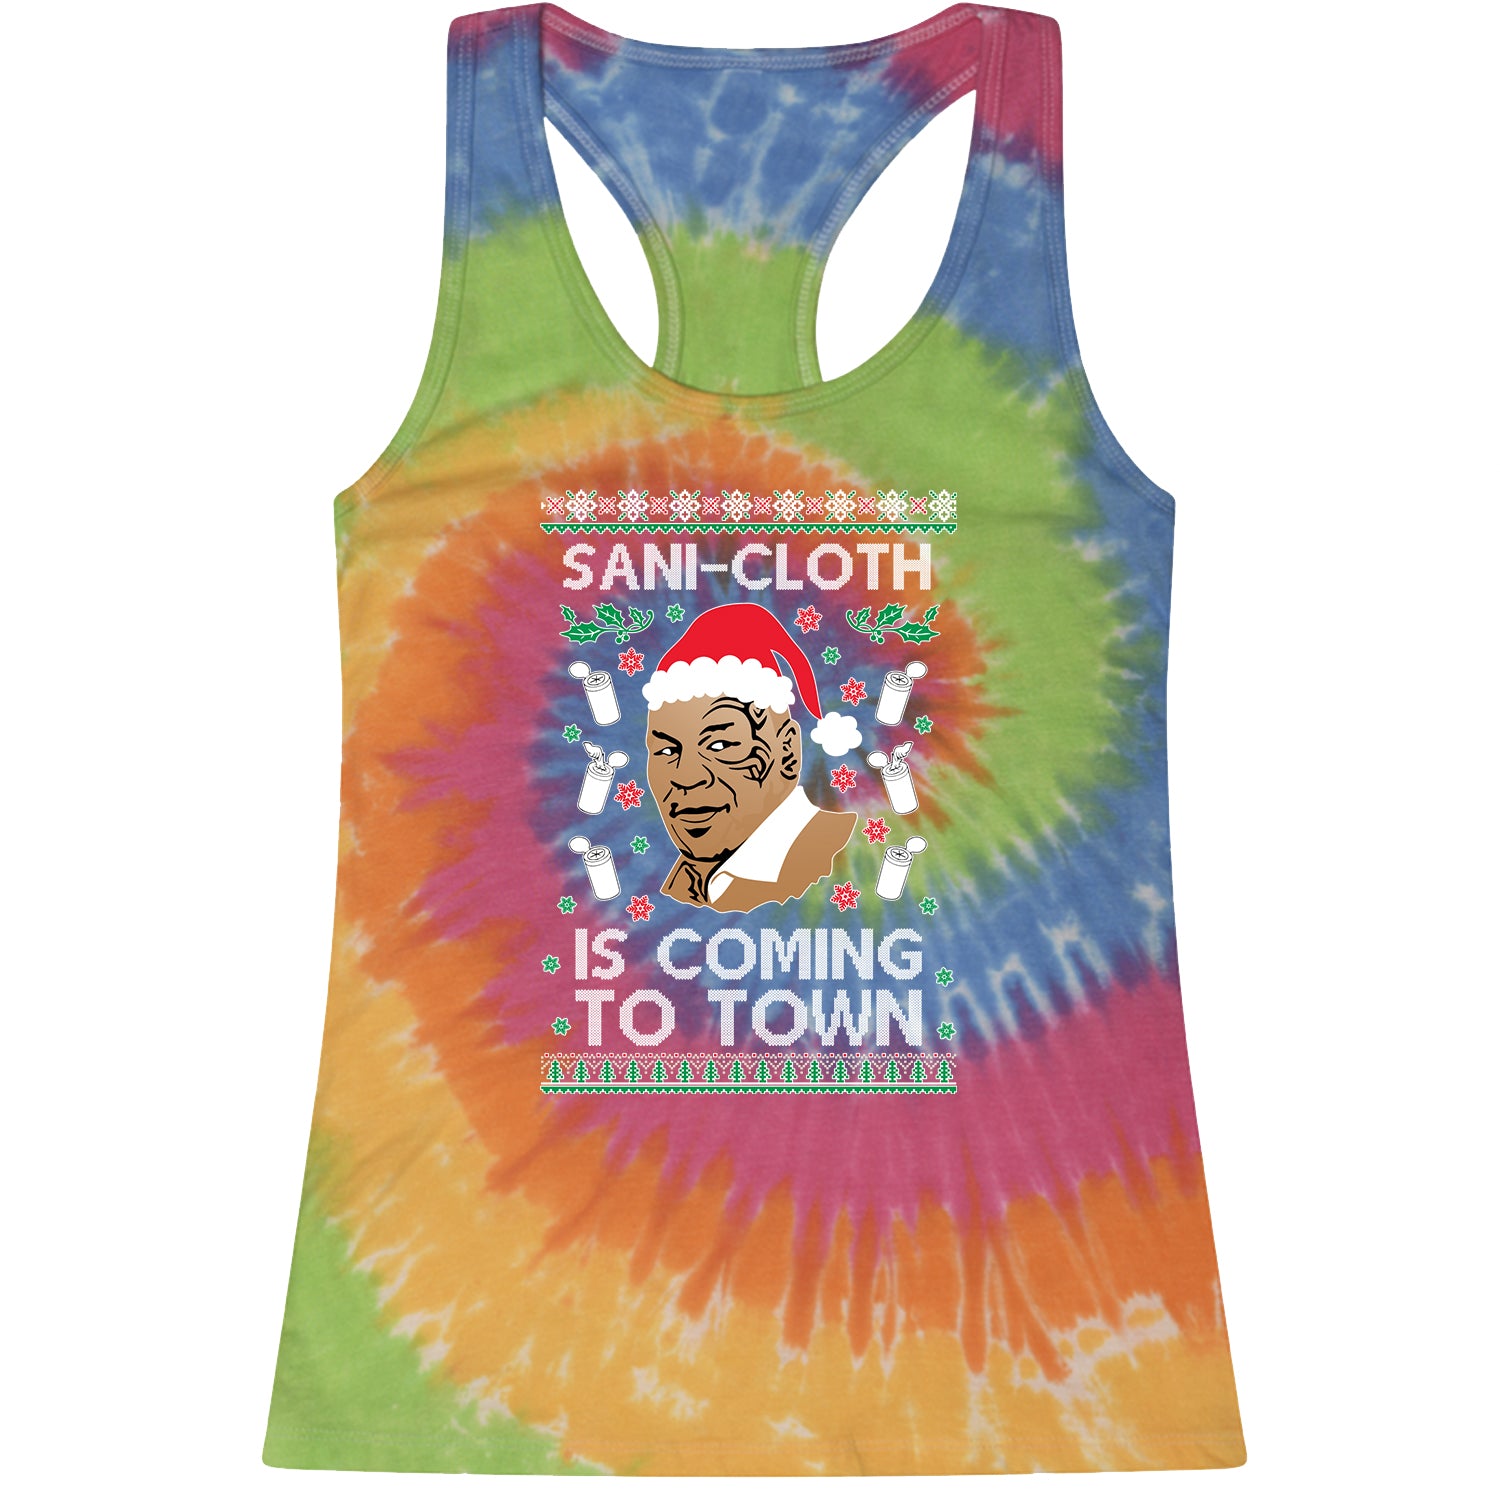 Sani-Cloth Is Coming To Town Ugly Christmas Racerback Tank Top for Women 2021, mike, miketyson, tyson by Expression Tees